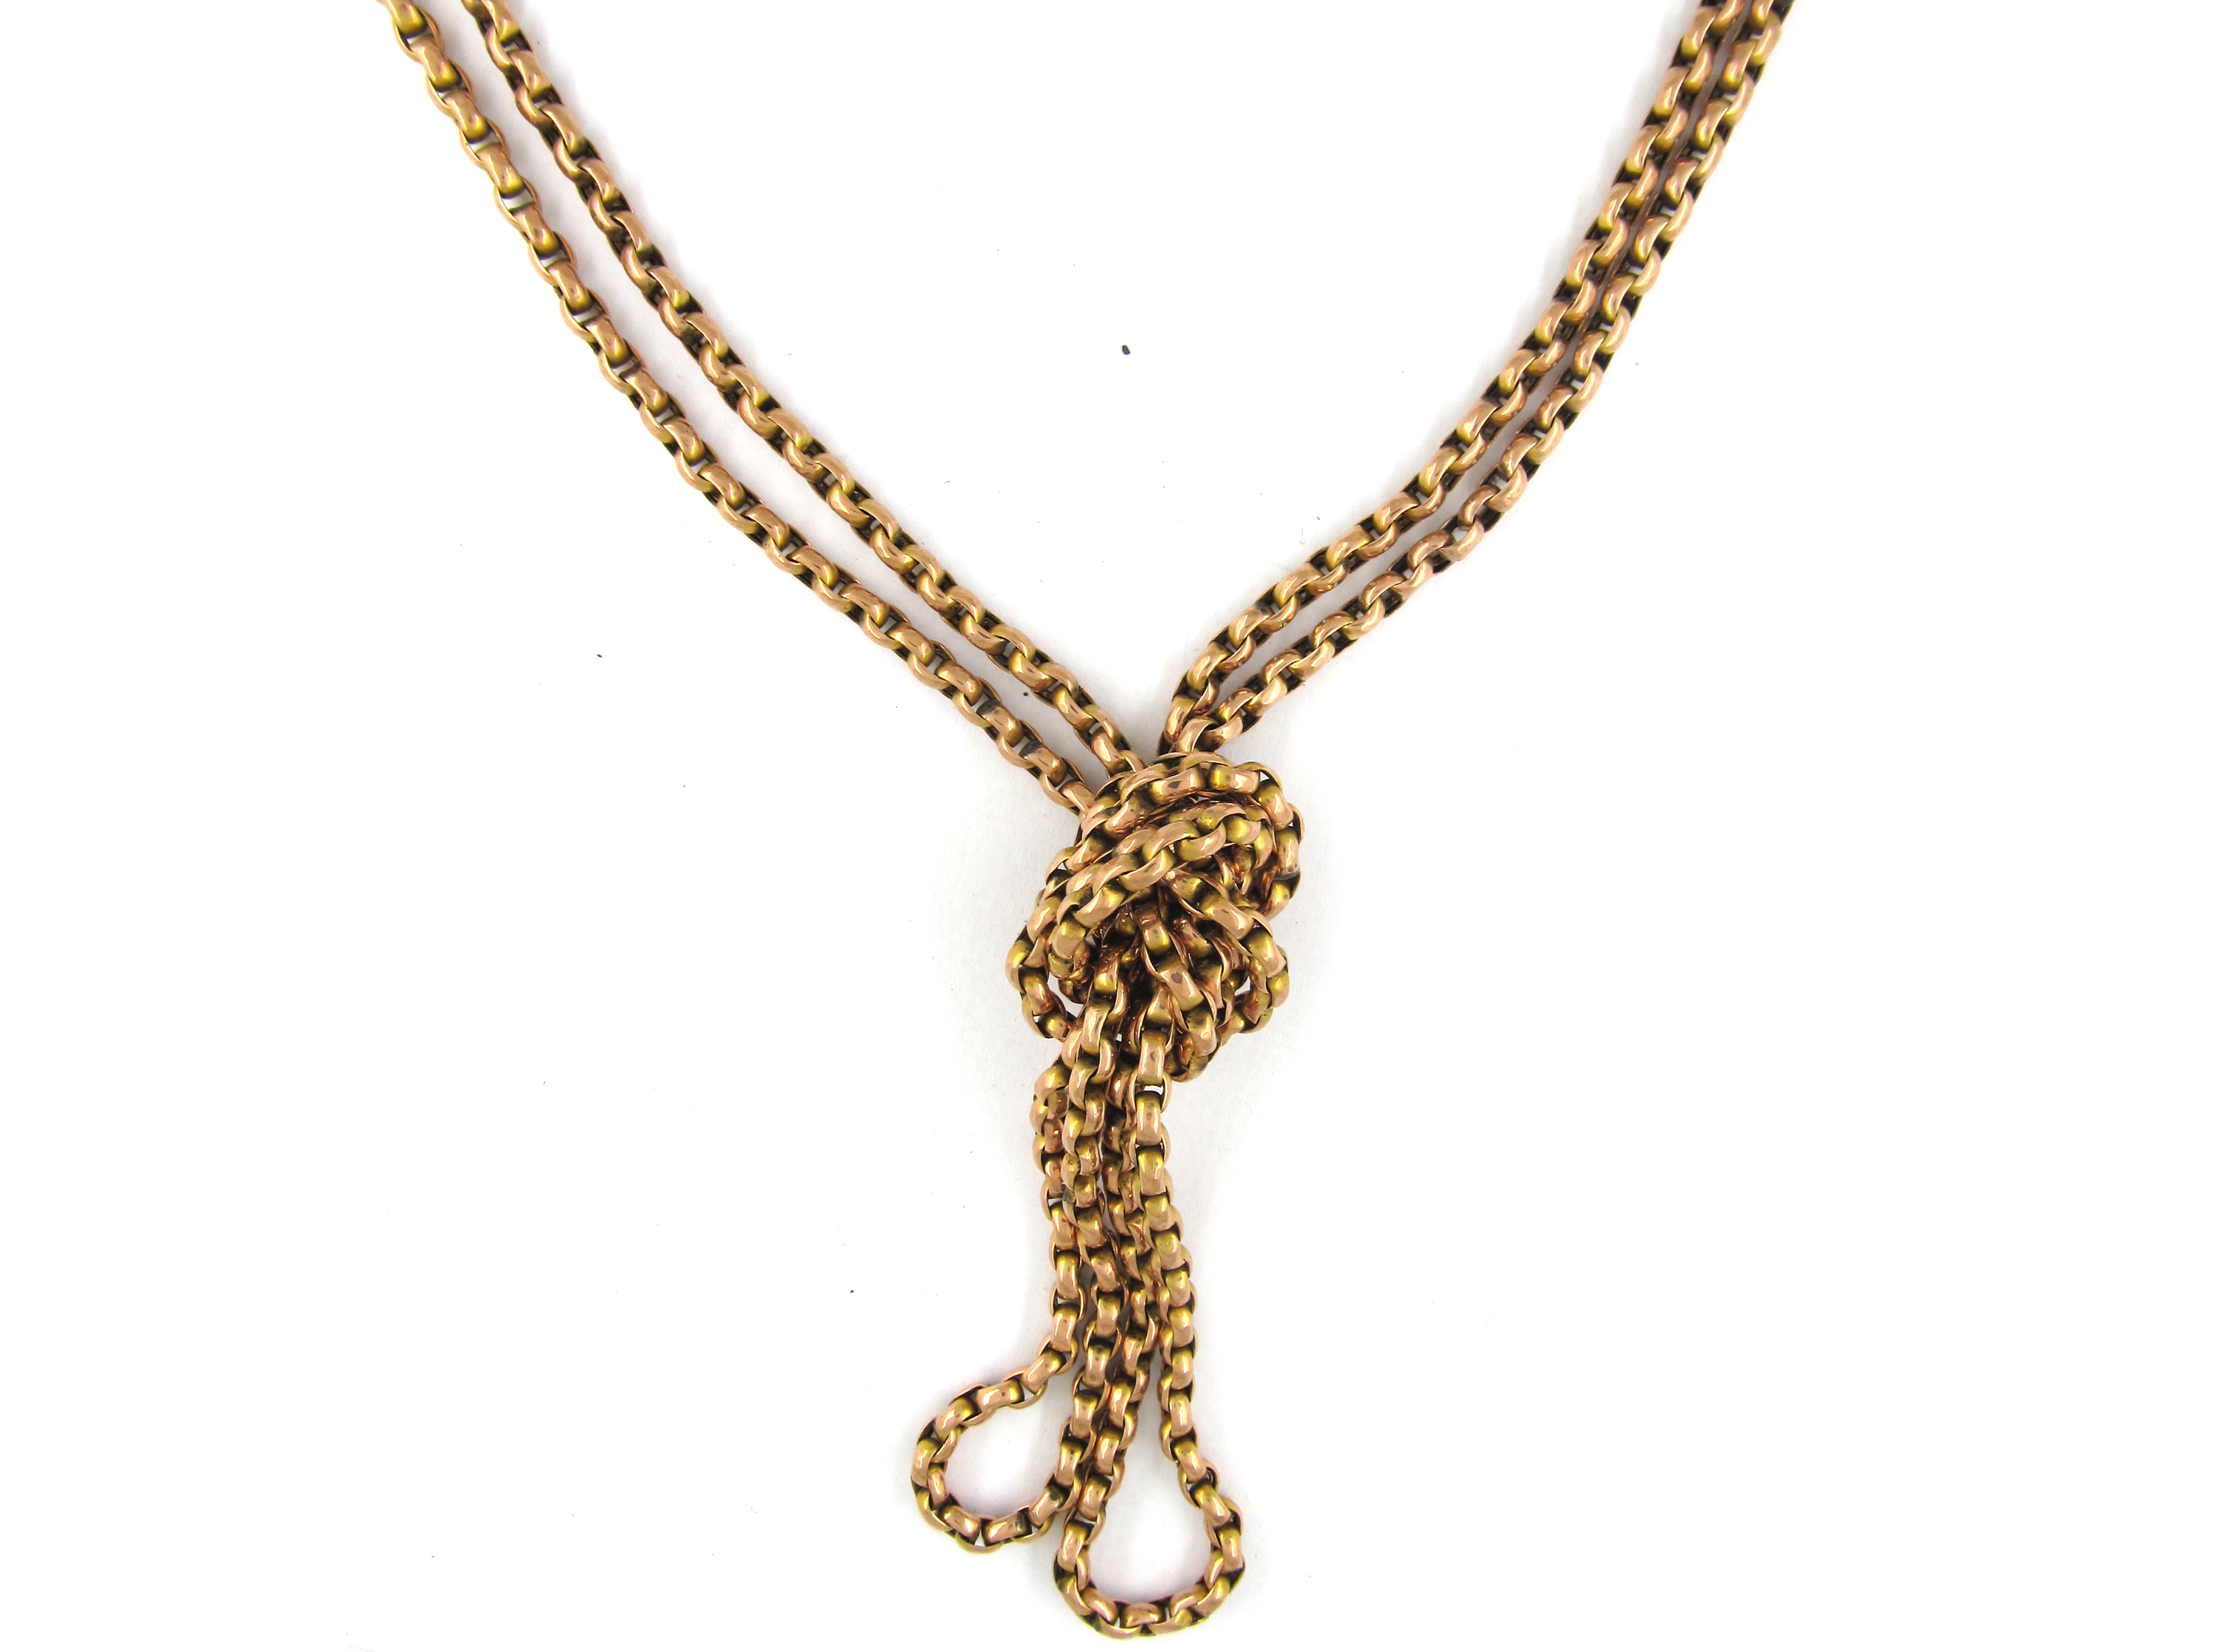 Victorian 9ct Gold Guard Chain (961D) | The Antique Jewellery Company